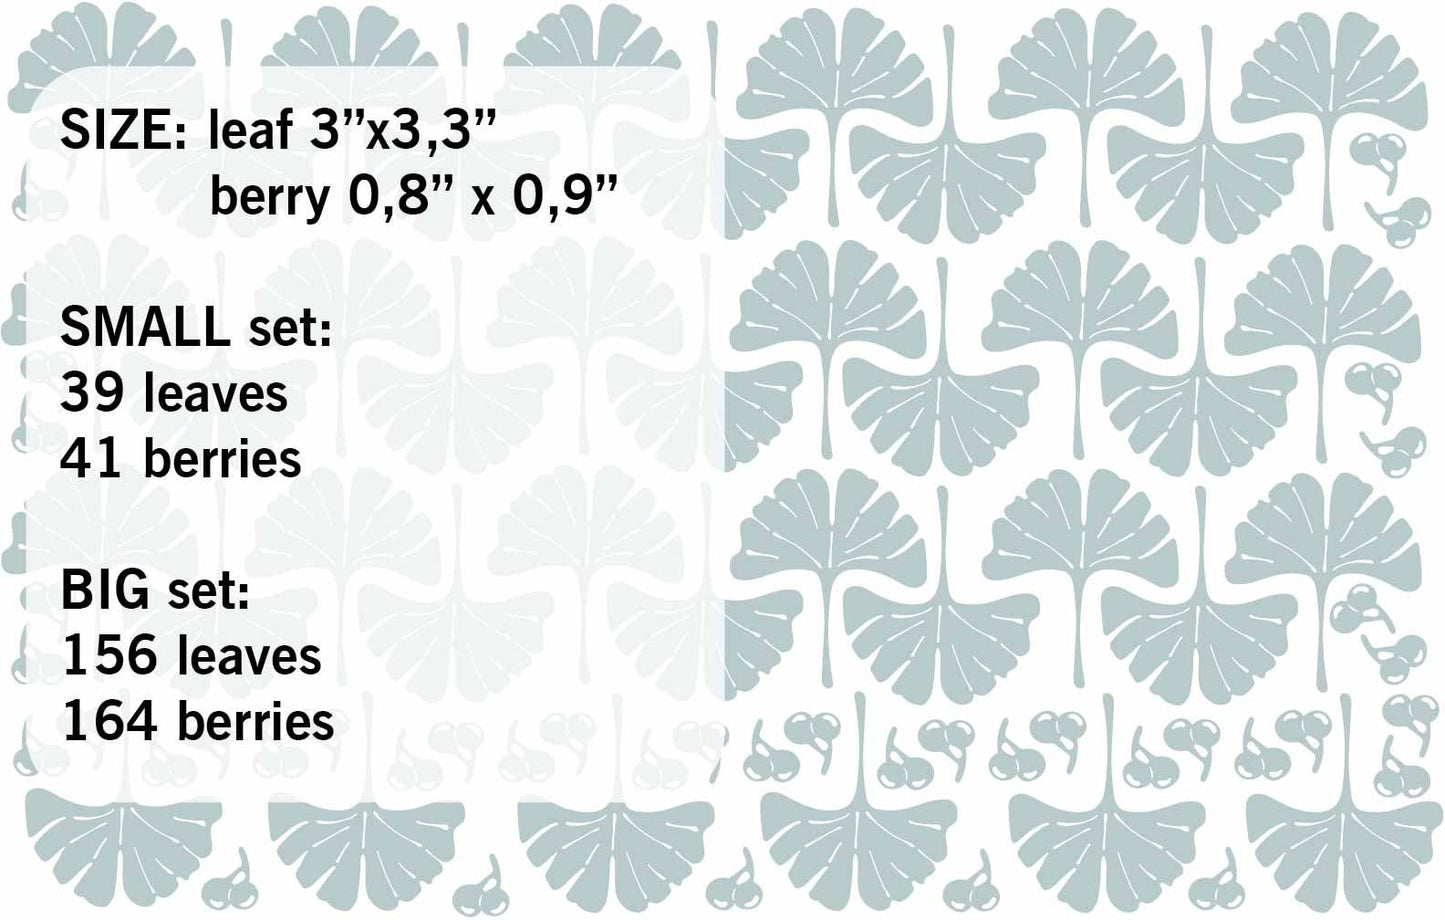 Ginko tree leaves Wall Decals Greenery Stickers, LF377